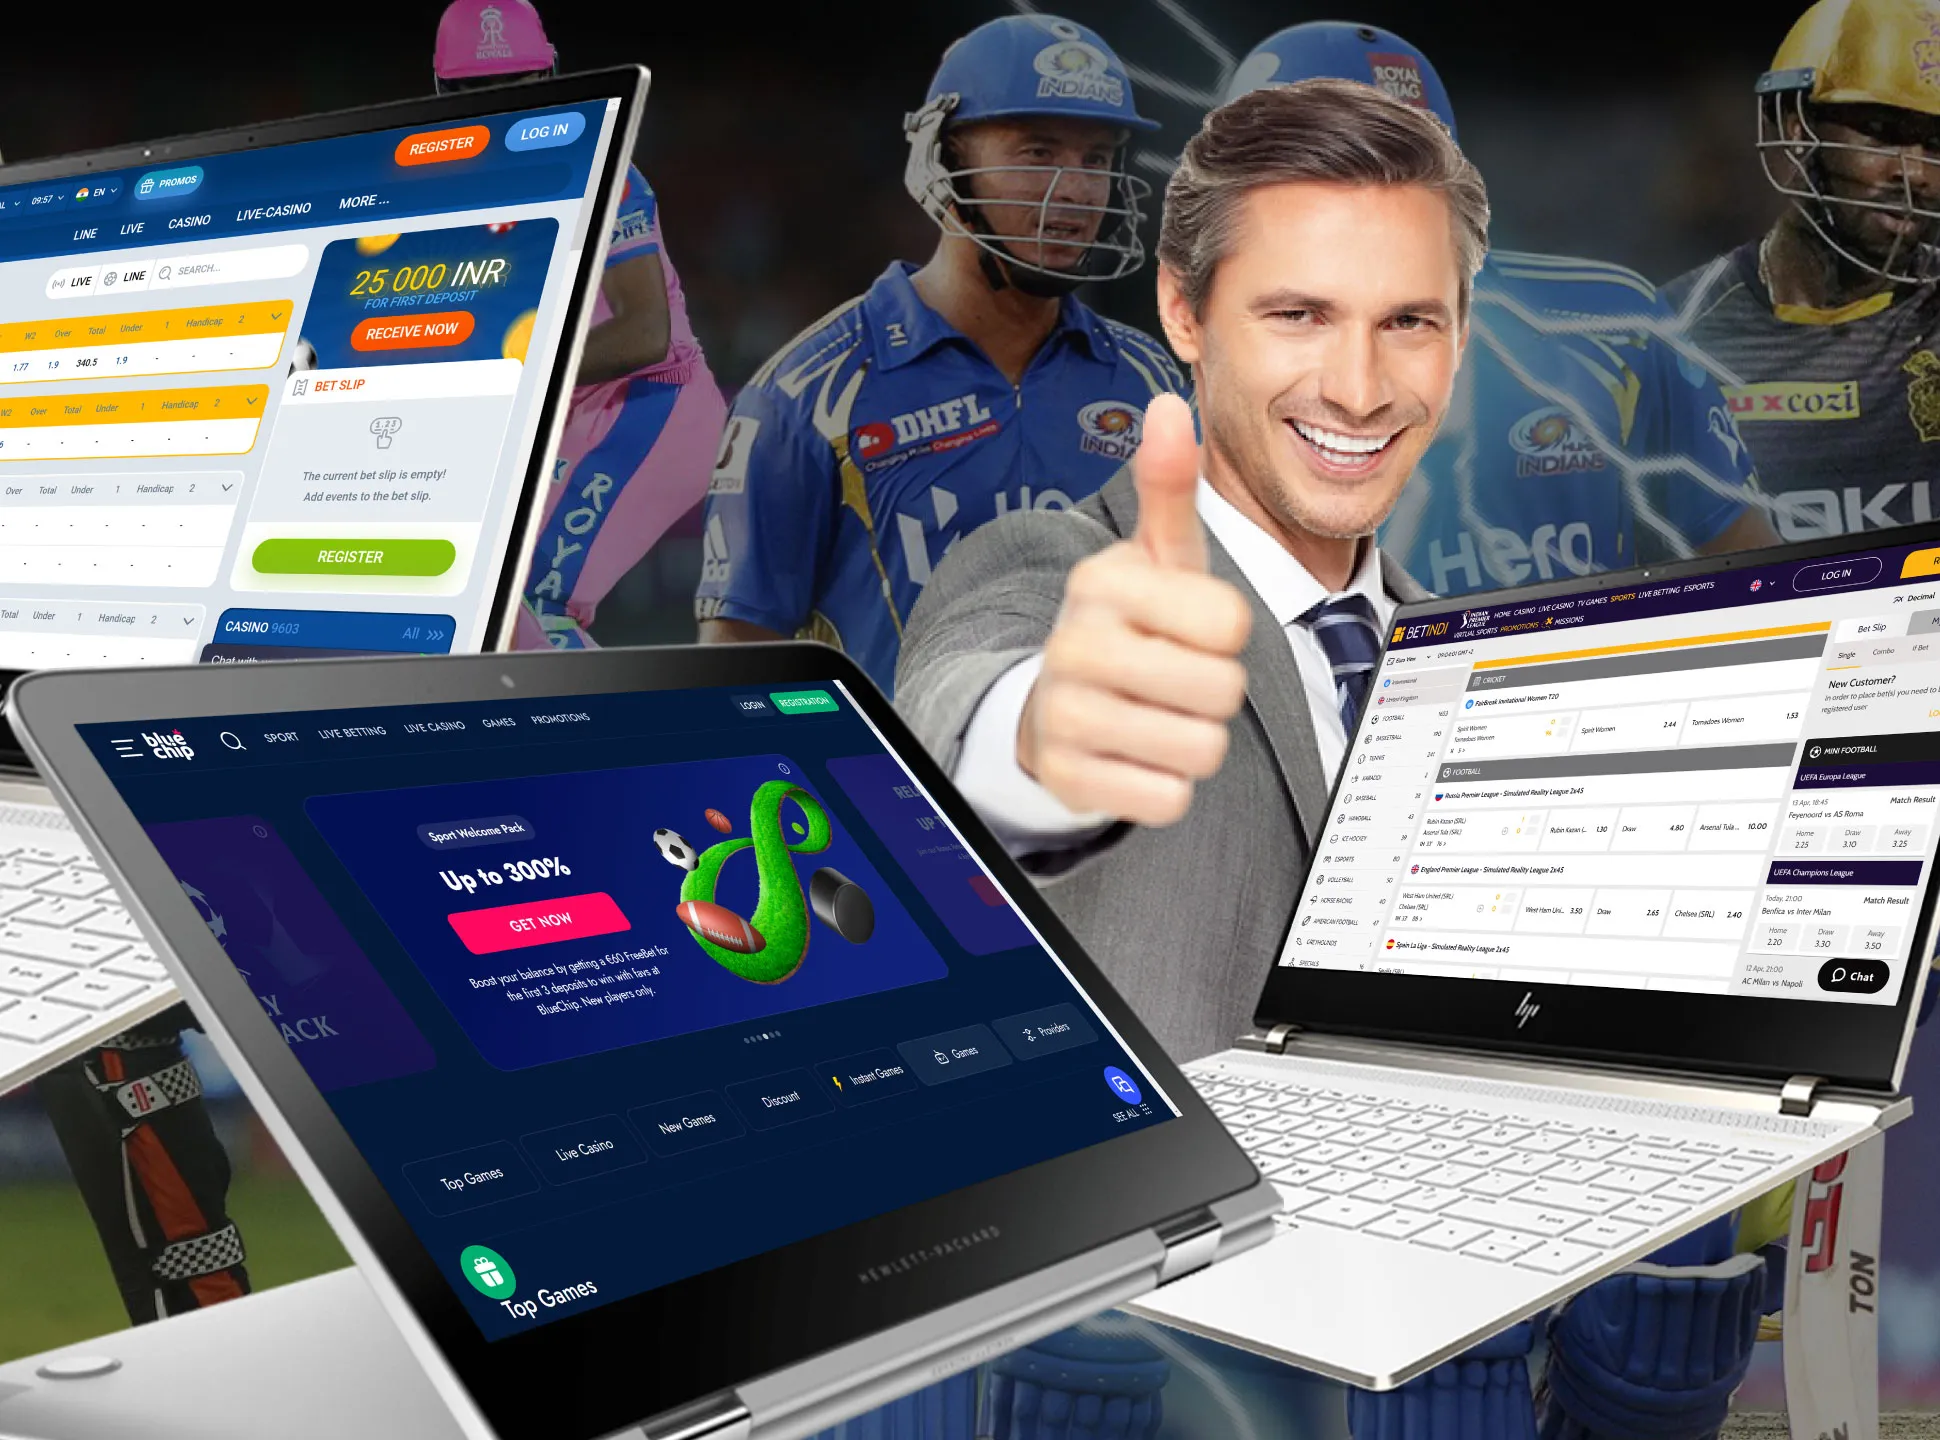 Follow the Cricket Betting Expert articles to learn more about the cricket betting sites, IPL news and other information from the cricket betting world.